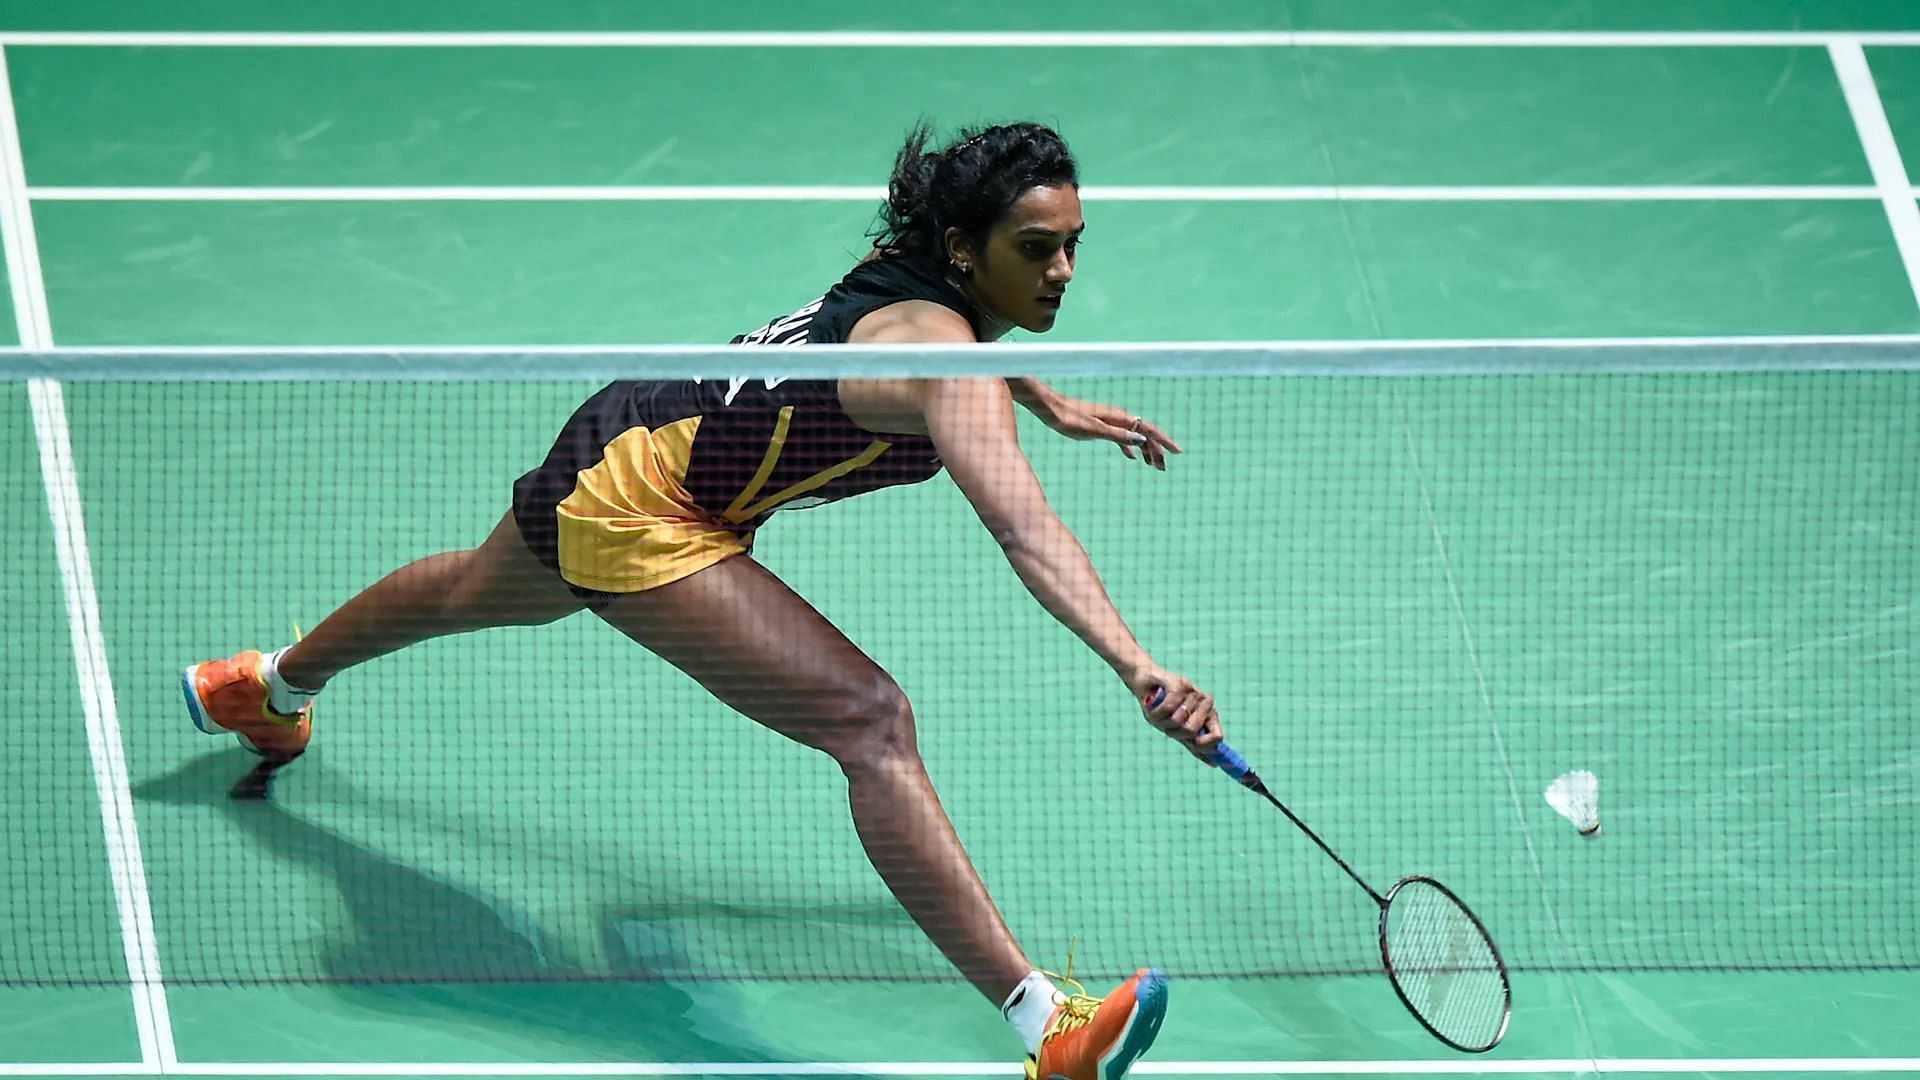 PV Sindhu will fight Supanida Katethong for a spot in the semi-finals of the Denmark Open